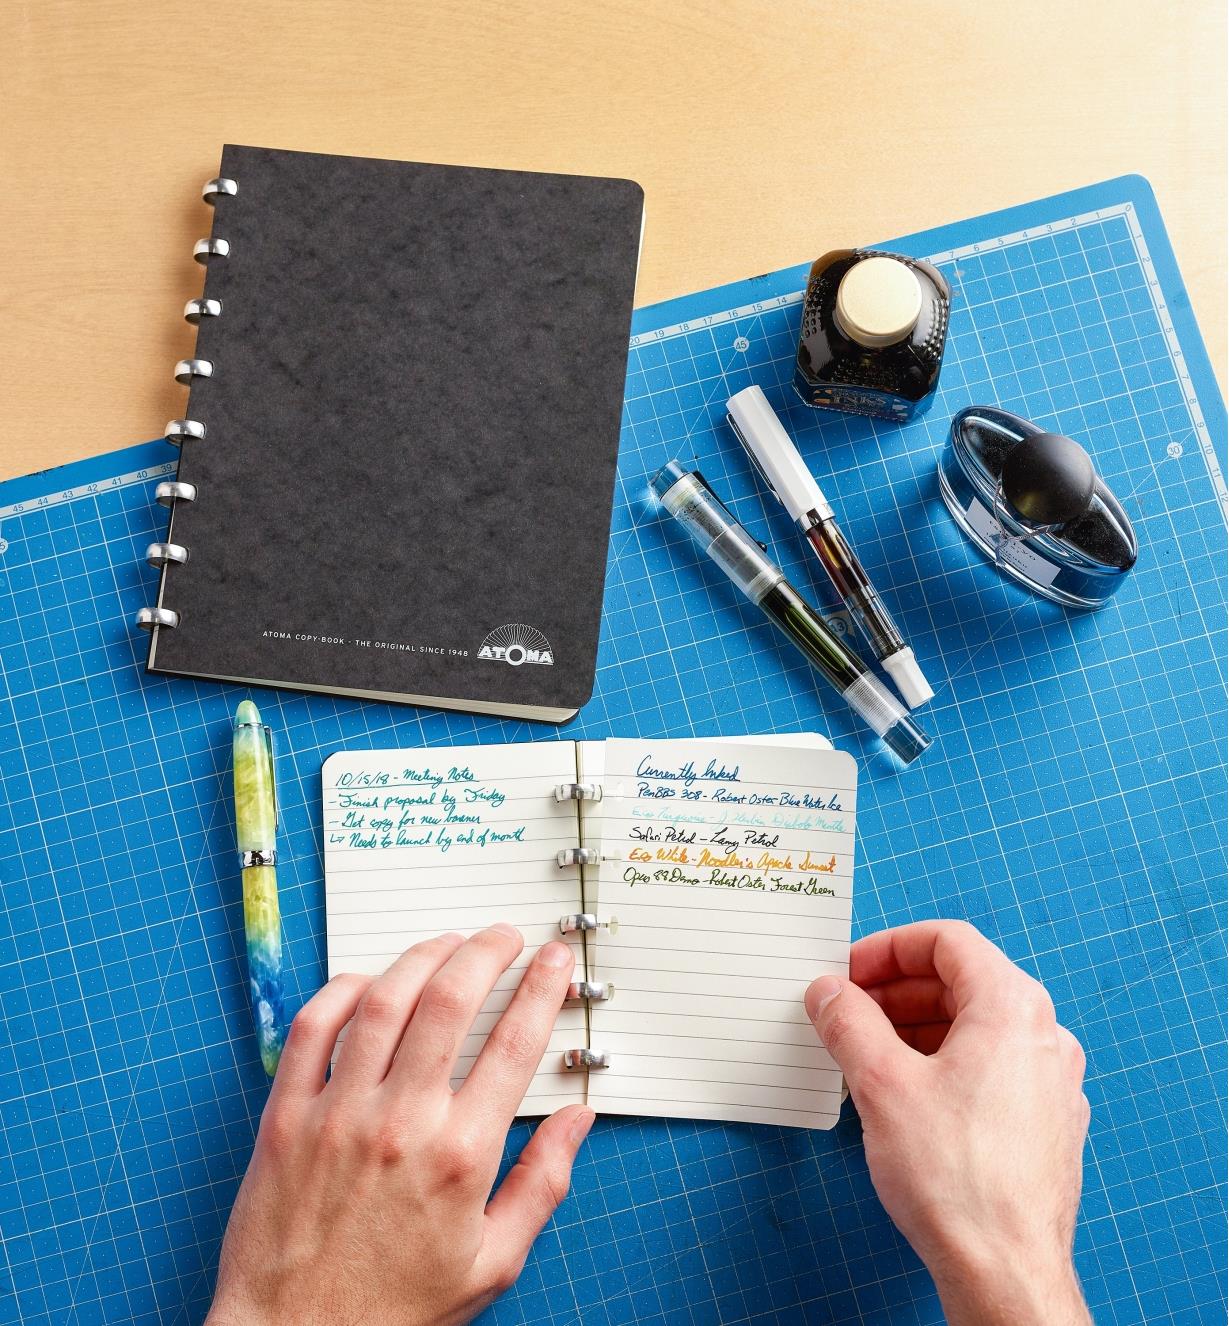 Removing a written-on page from the small Atoma notebook, with the large notebook sitting close by